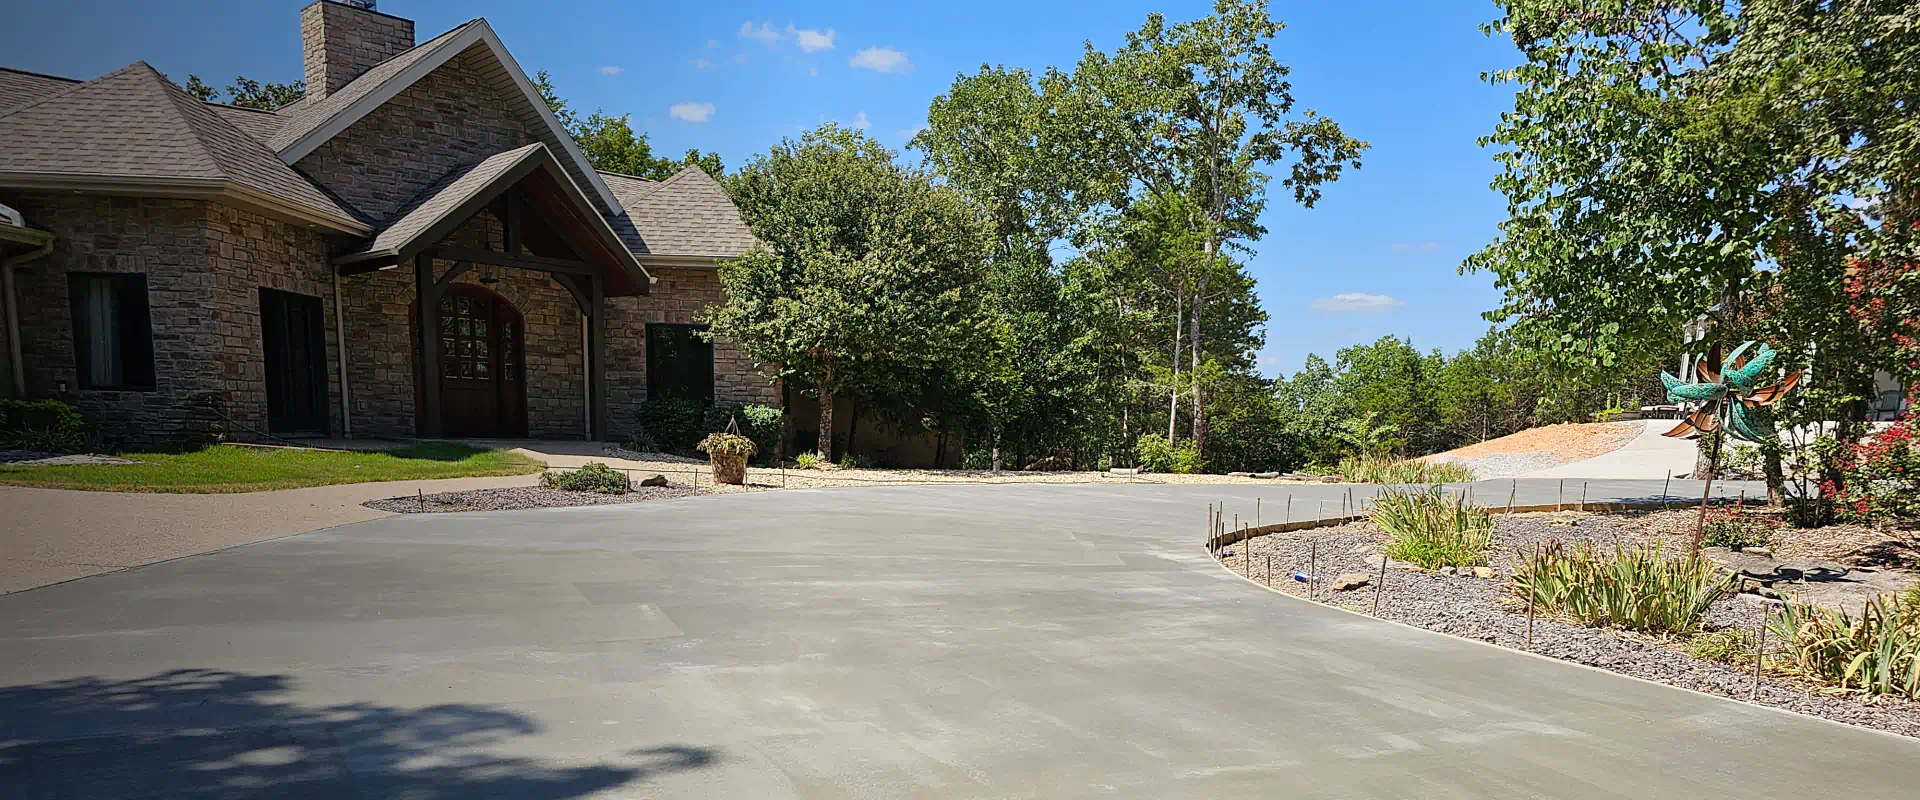 exterior view of a house with a new driveway